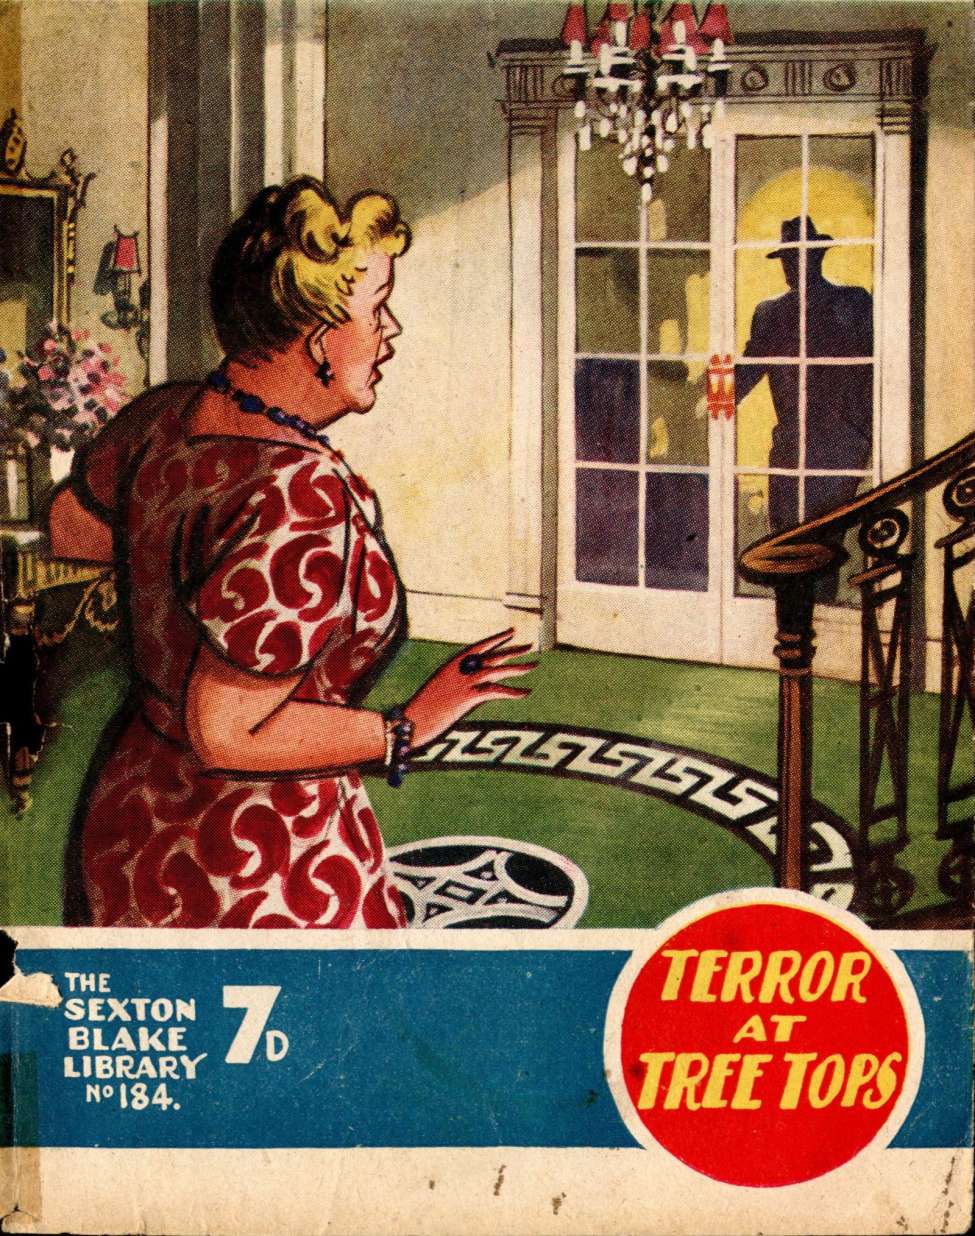 Book Cover For Sexton Blake Library S3 184 - Terror at Treetops